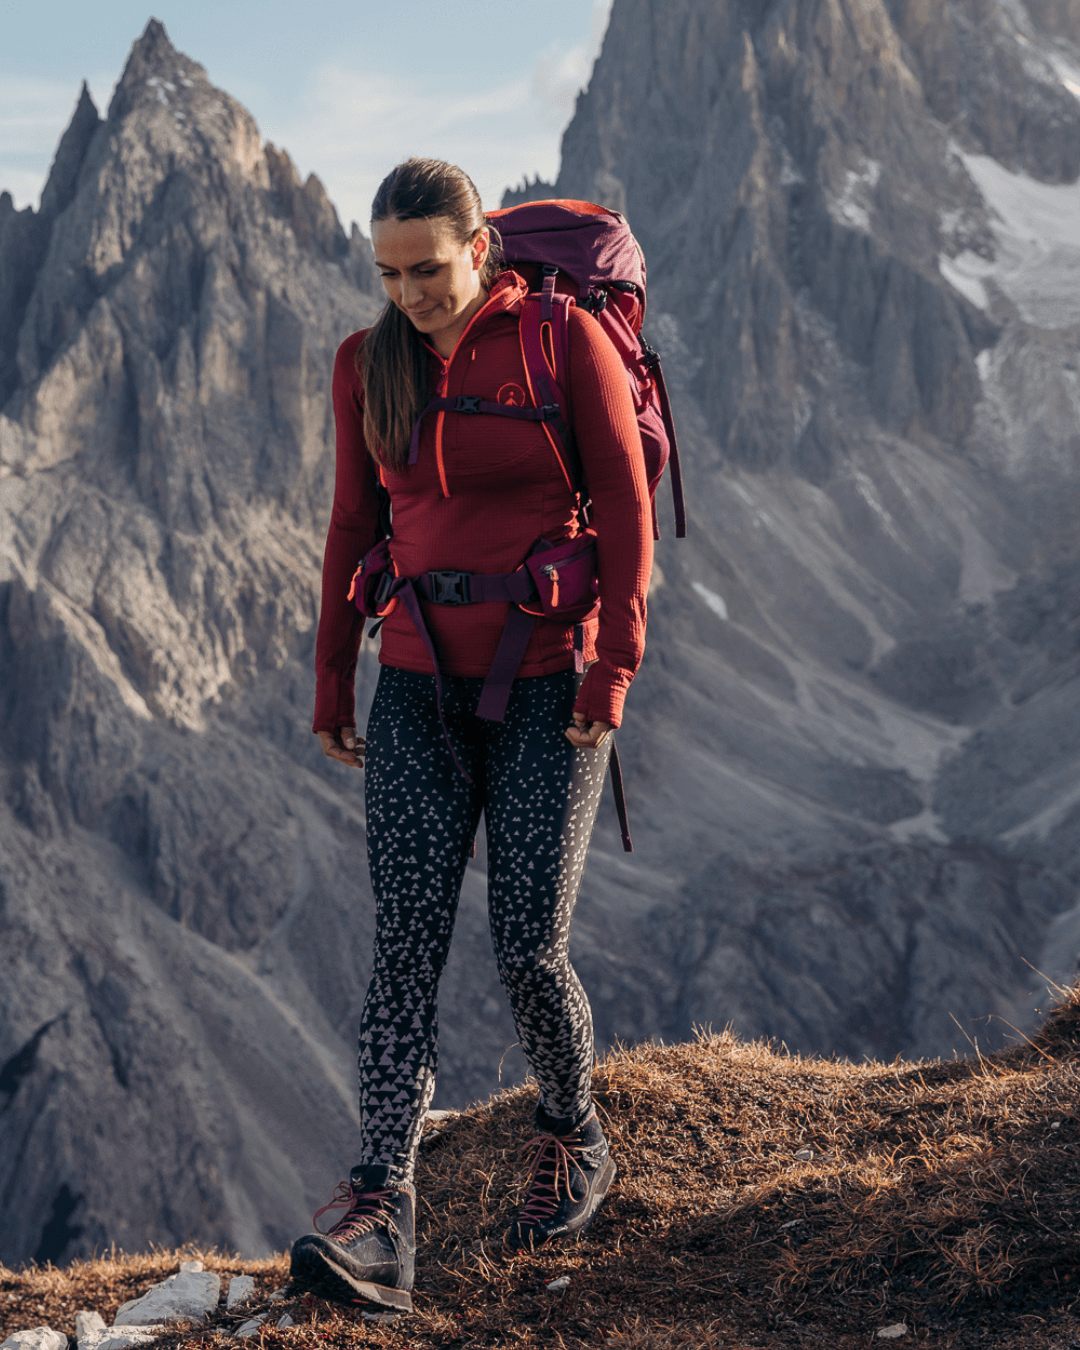 Leggings guide – Alpine Nation Outdoor Clothing